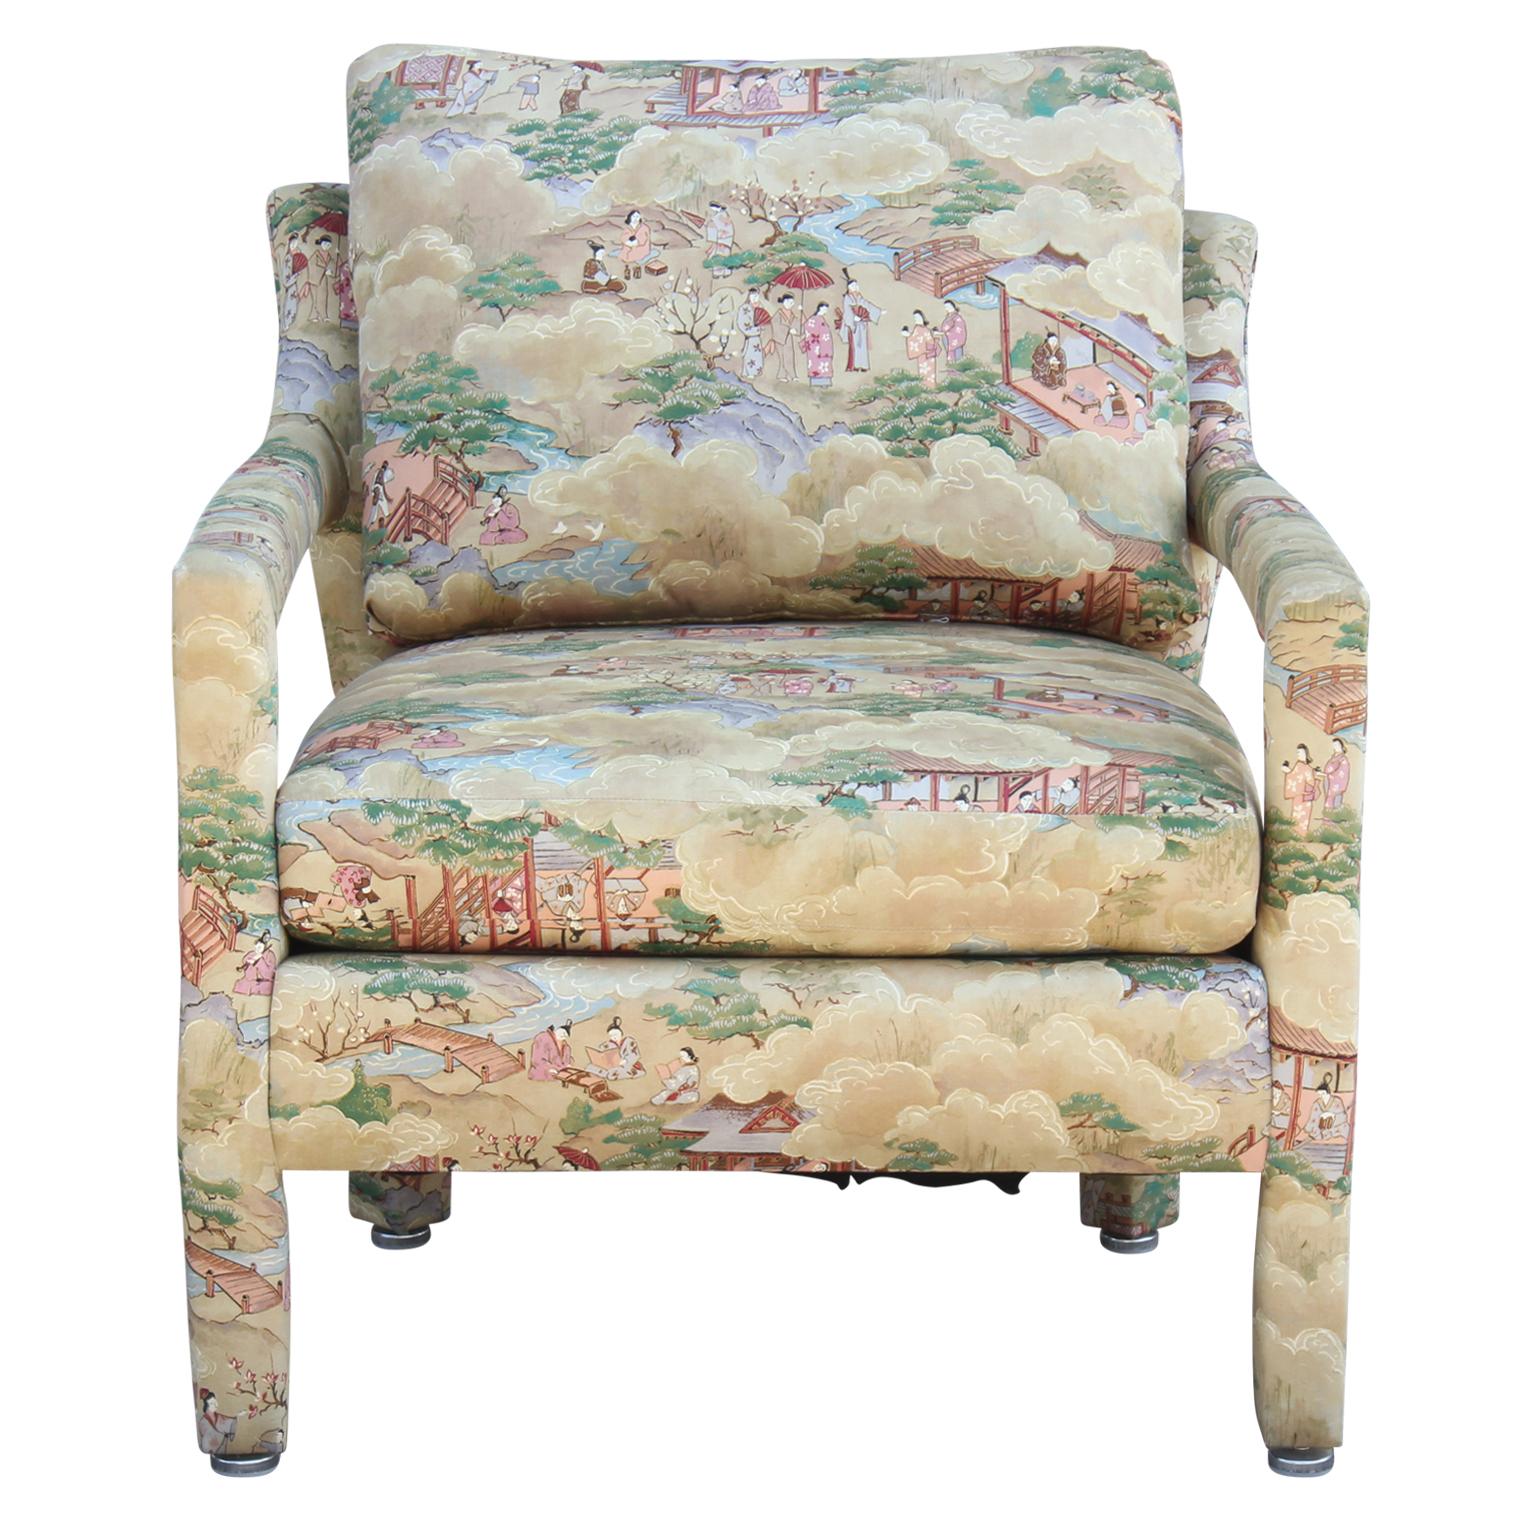 A set of beautiful Parsons styled barrel back lounge chairs with whimsical chinoiserie landscape fabric. The delightful scenery and soft pastel colors make these chairs a great statement piece in any room.